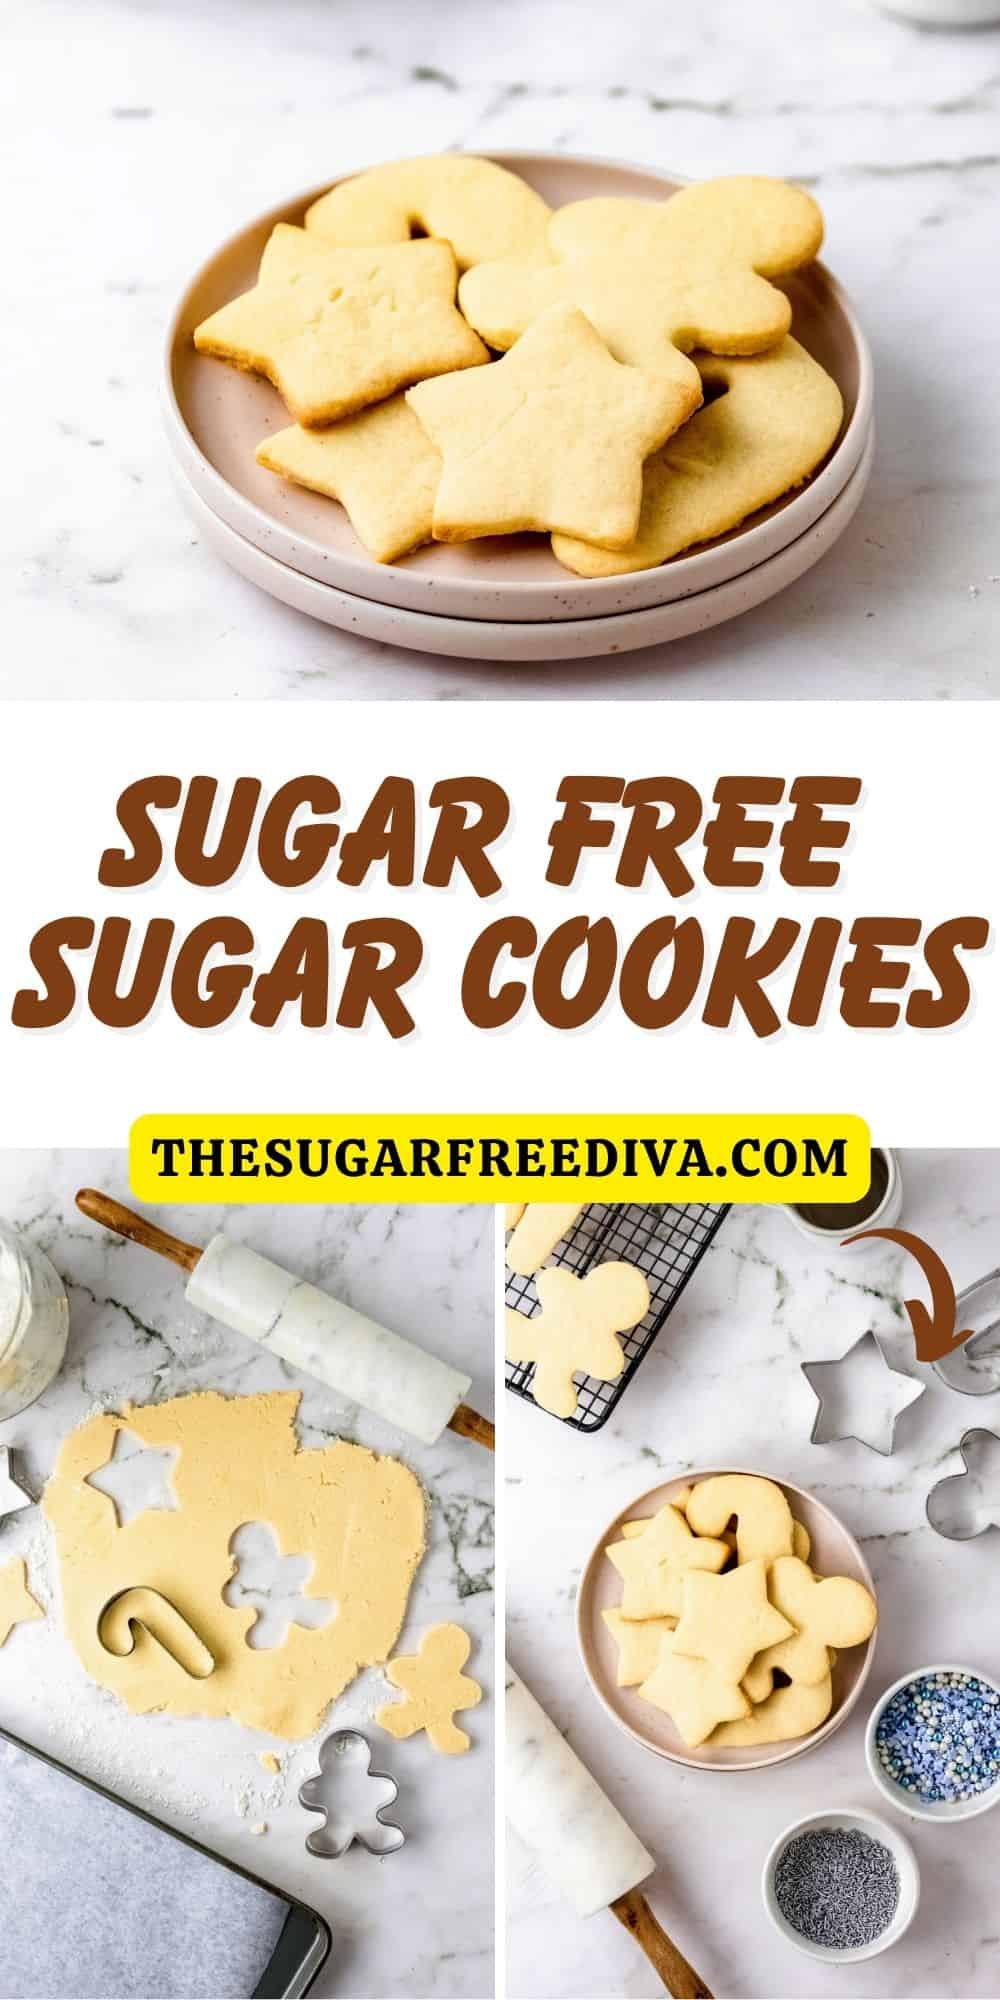 Sugar Free Sugar Cookies, a simple recipe based on a classic buttery dessert or snack idea. Made with no added sugar. Keto option.